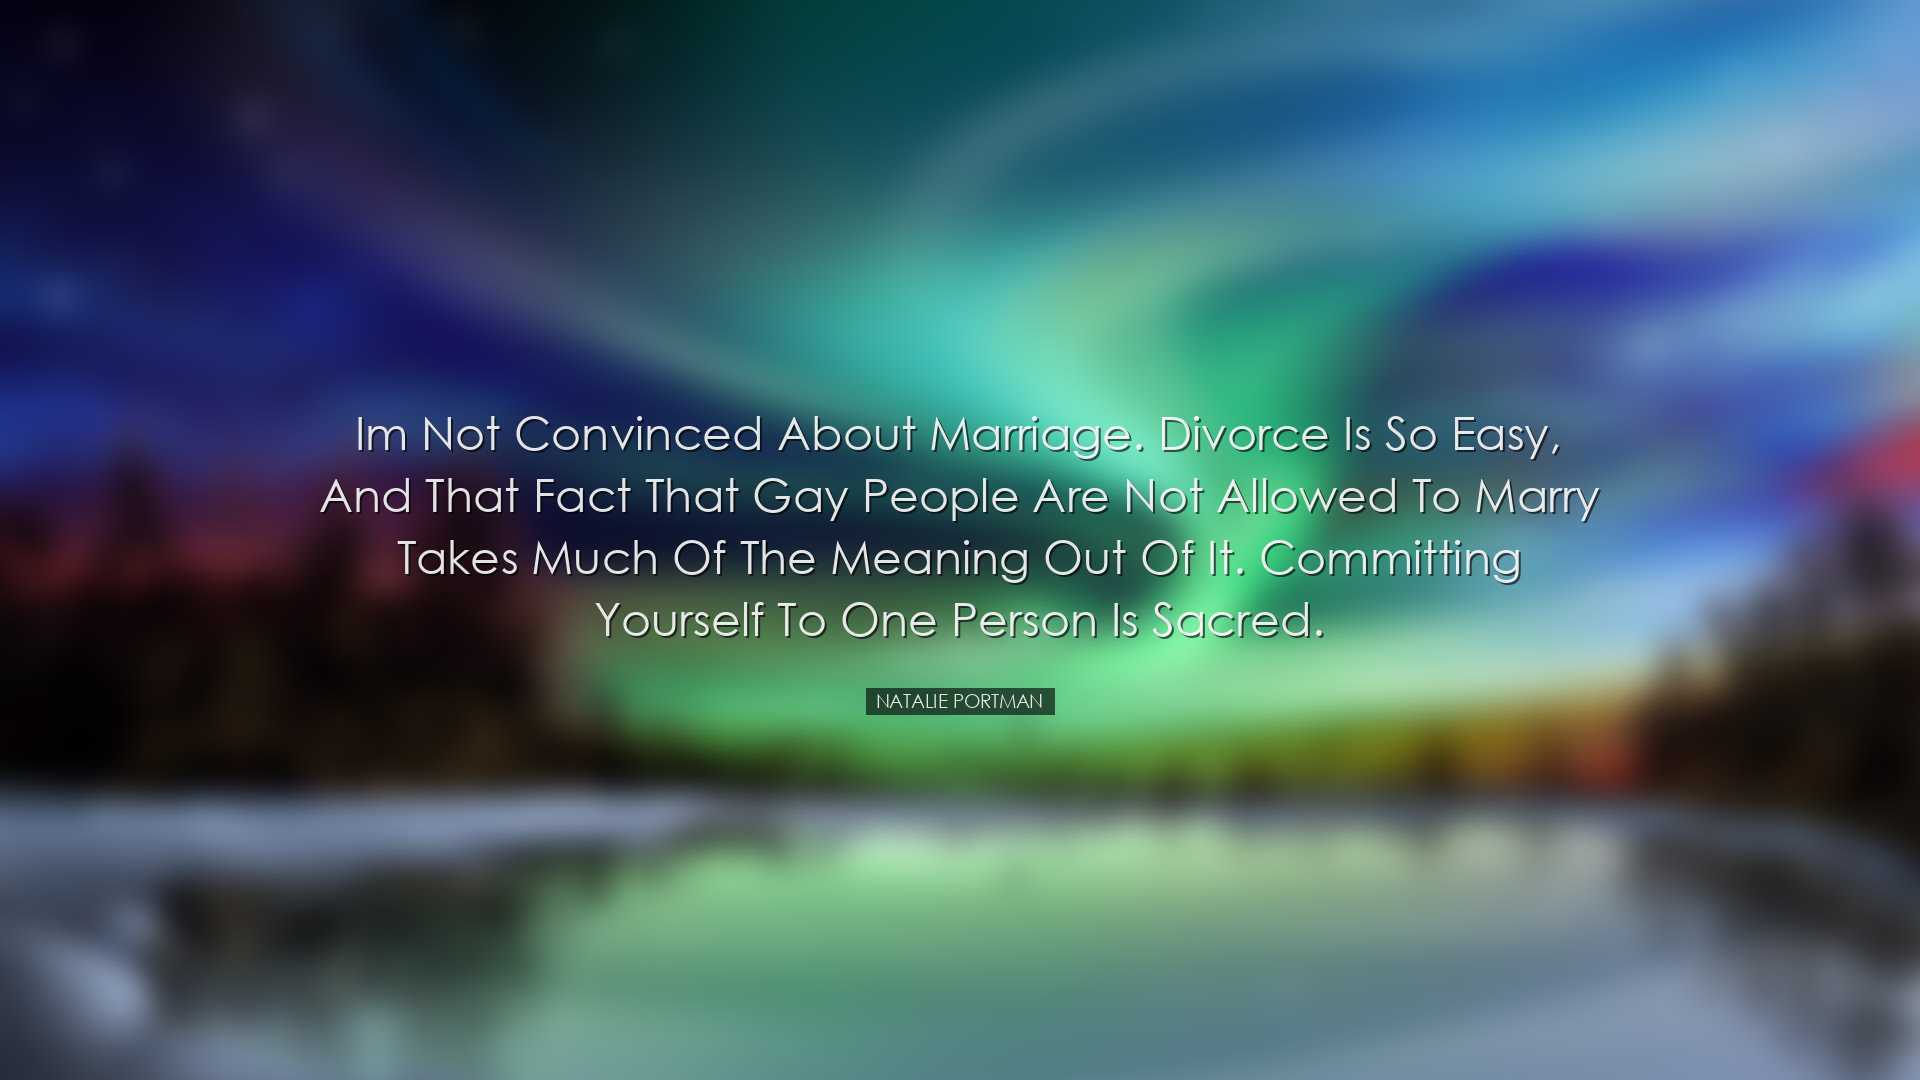 Im not convinced about marriage. Divorce is so easy, and that fact